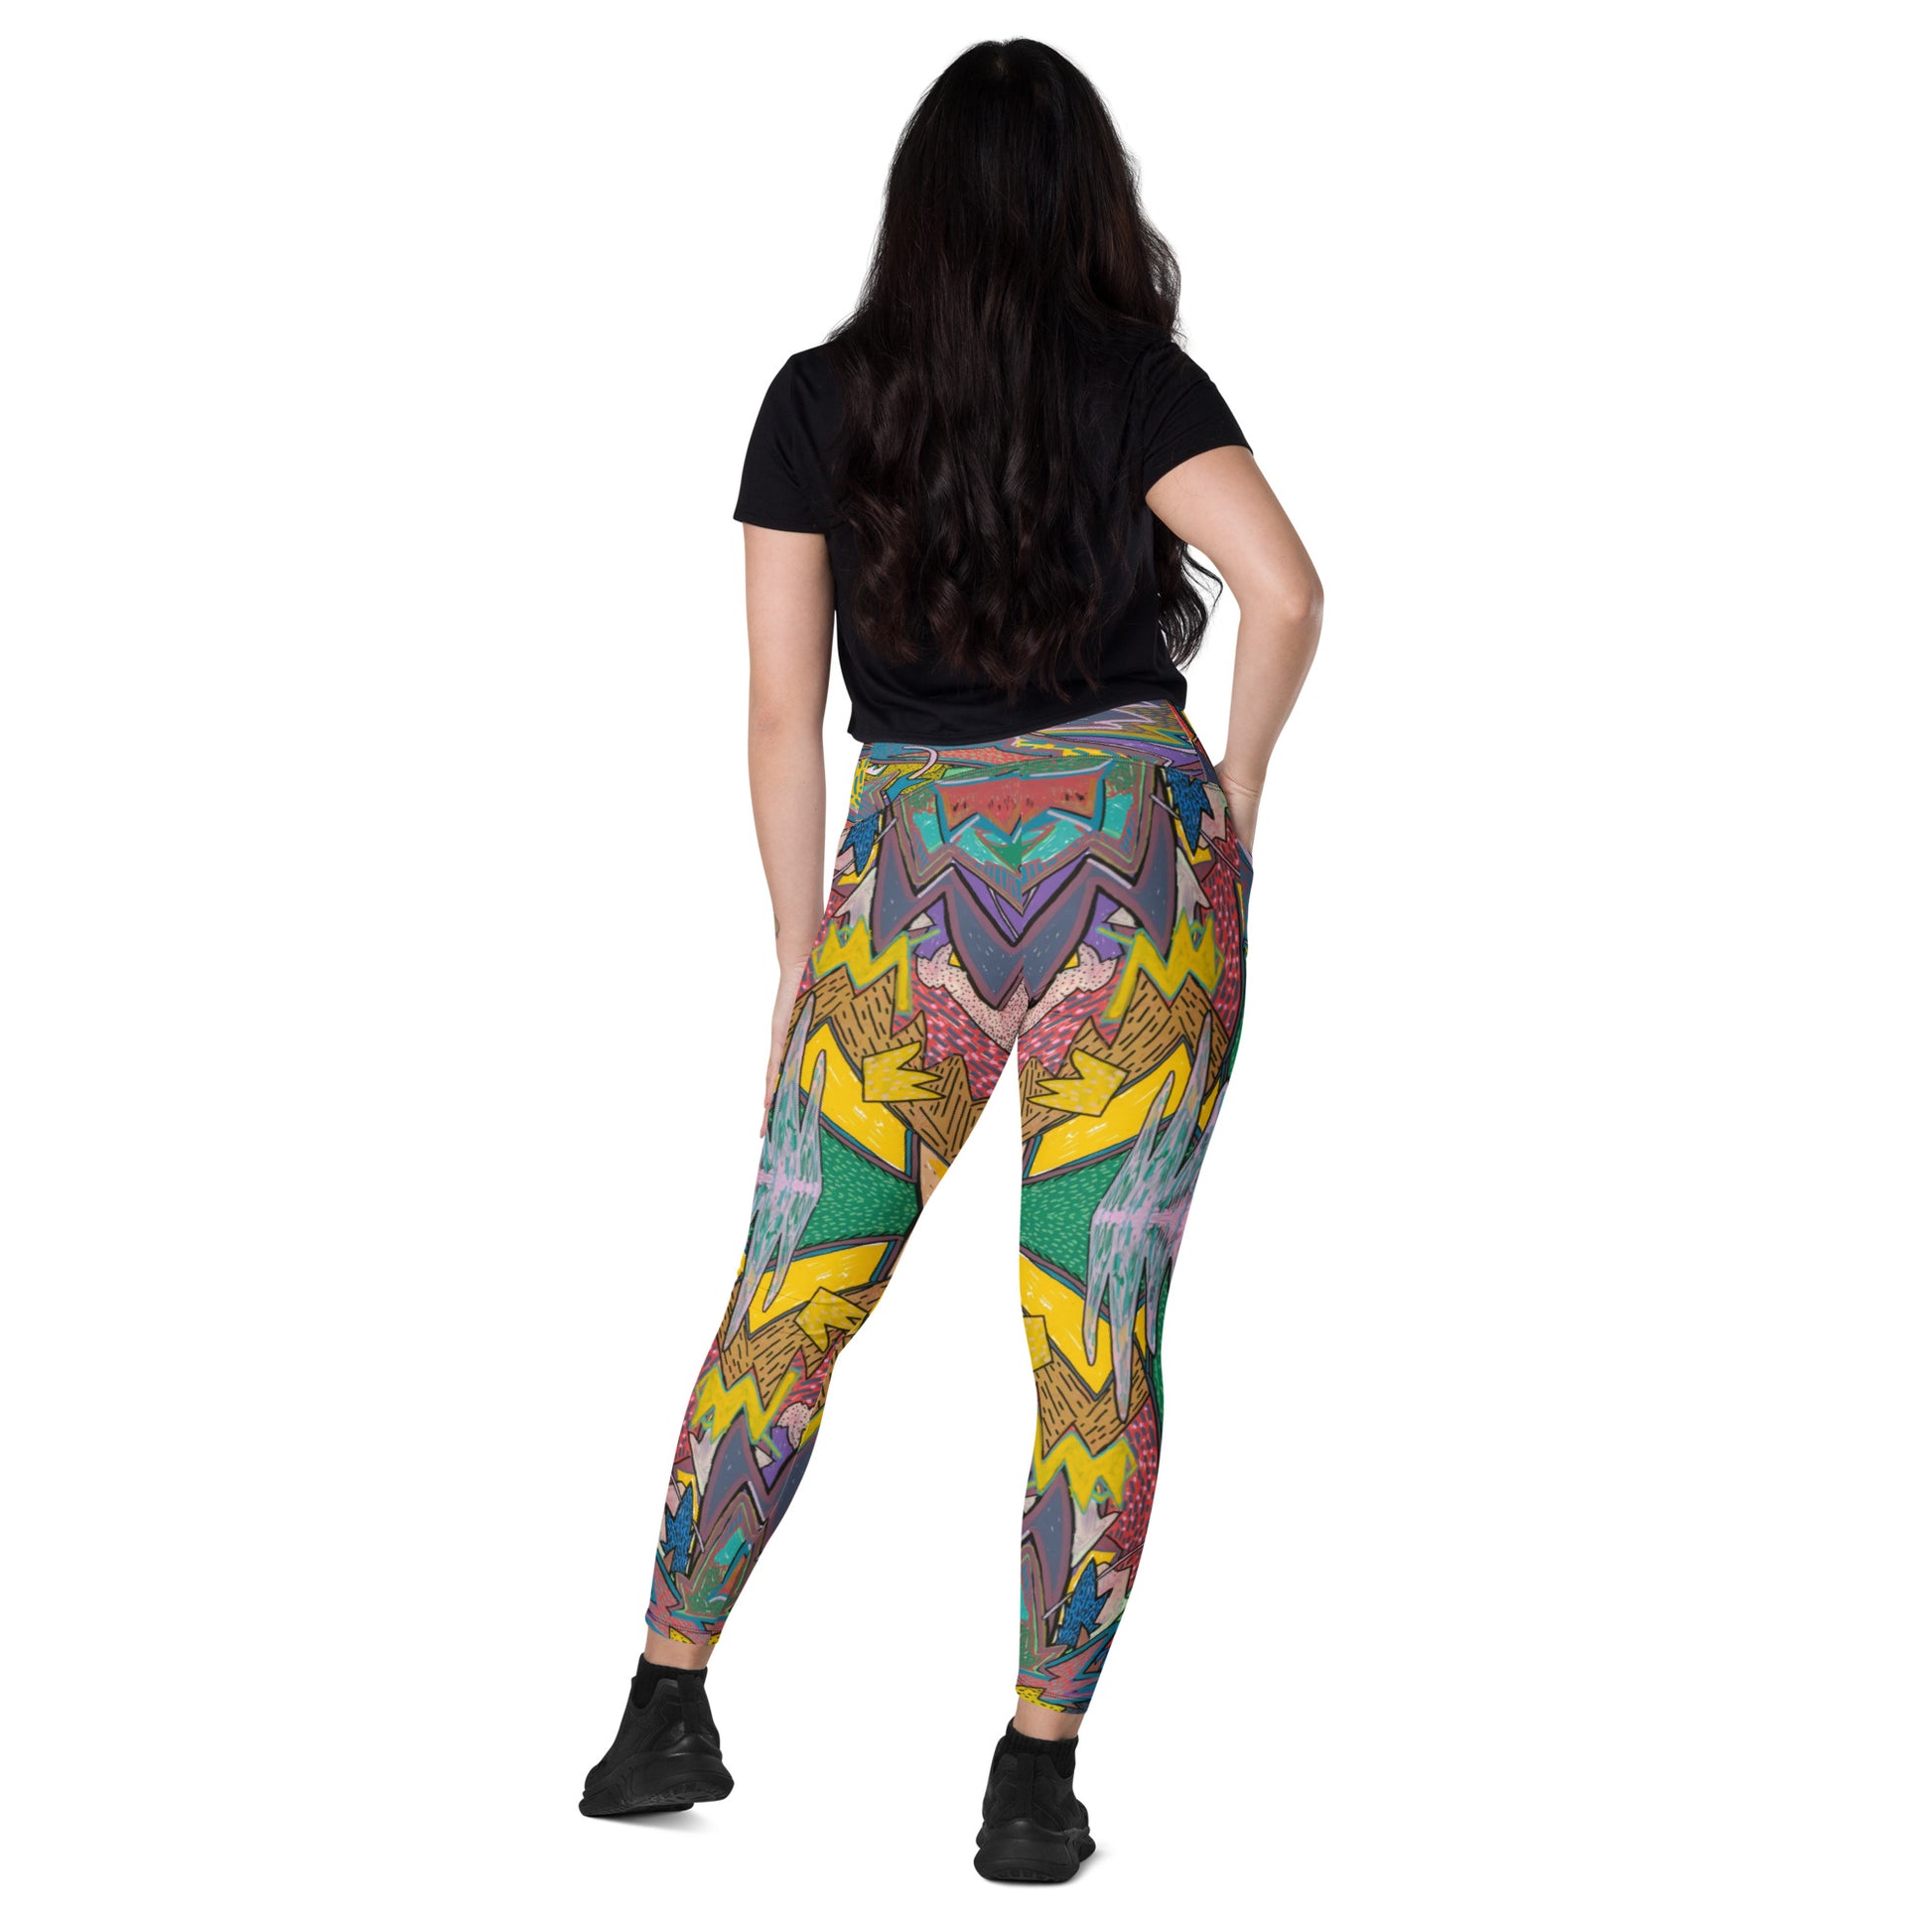 One eyed Graffiti Leggings with pockets - Sport Finesse